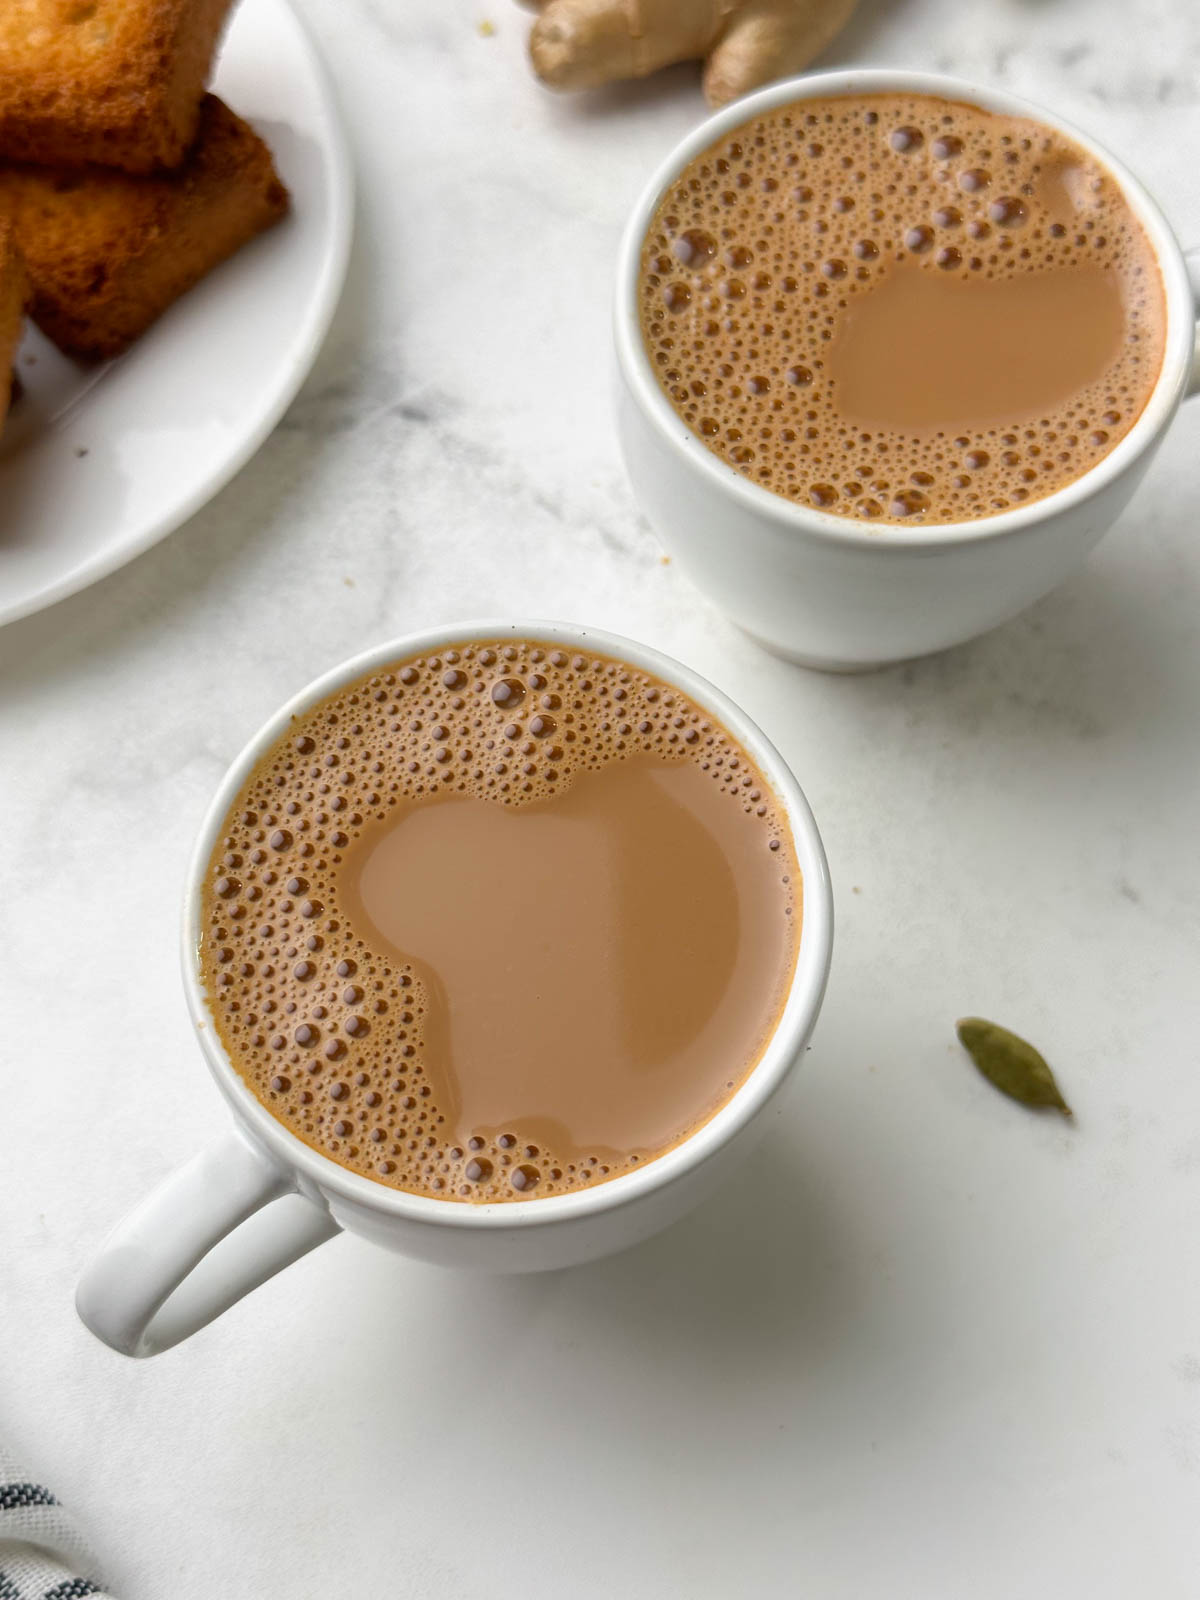 adrak wali chai served in a cup with rusk and ginger knob on the side